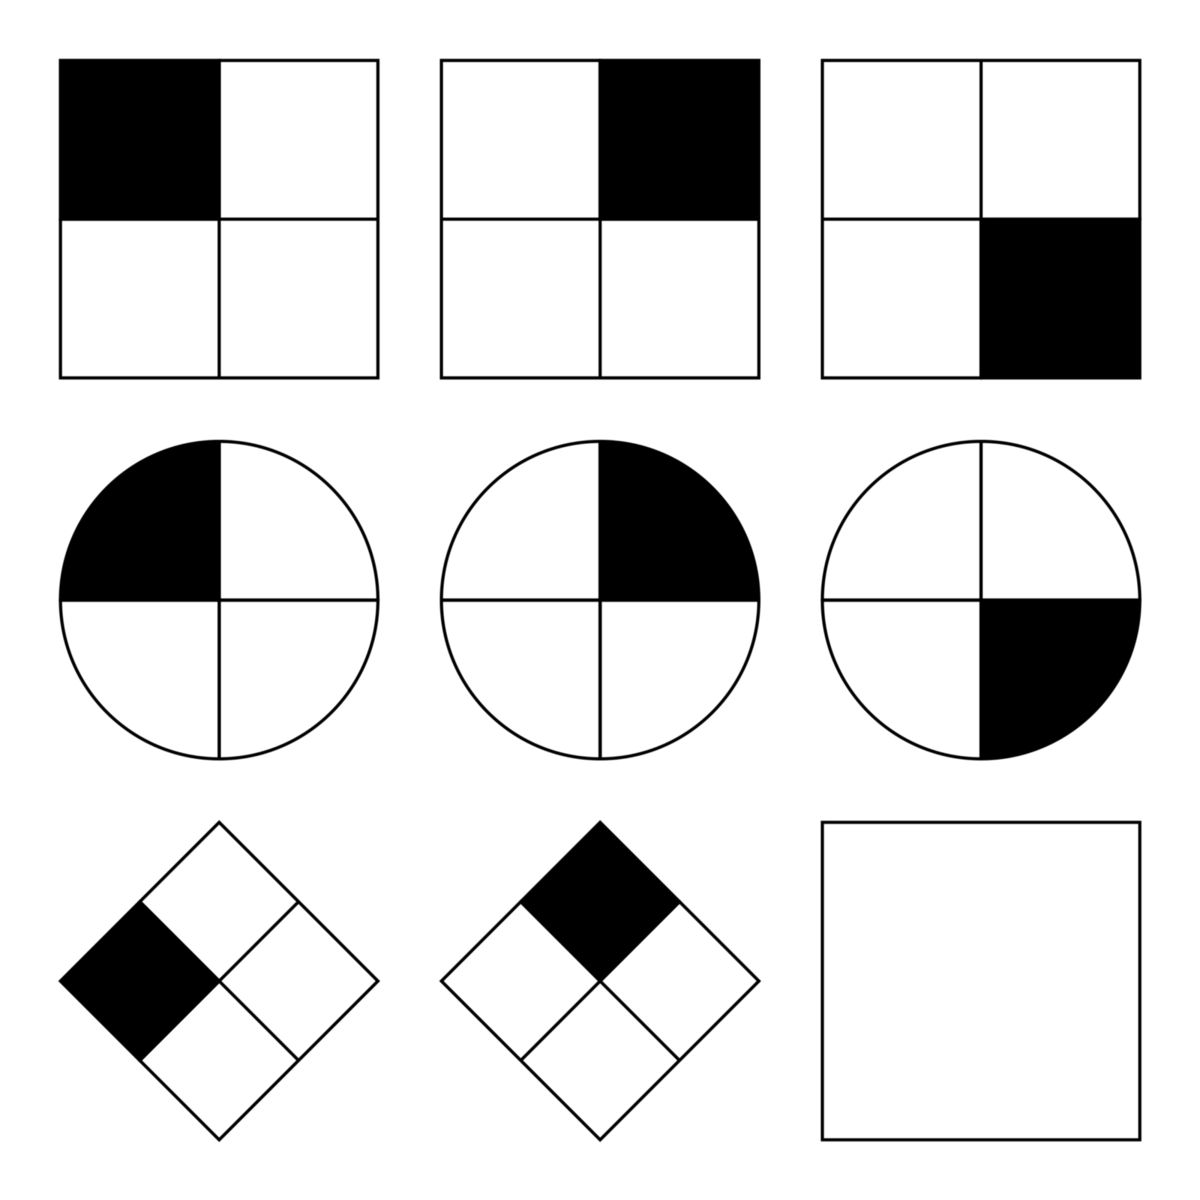 An IQ test item in the style of a Raven’s Progressive Matrices test. Given eight patterns, the subject must identify the missing ninth pattern. [source: [Wikipedia](https://en.wikipedia.org/wiki/Raven%27s_Progressive_Matrices)]